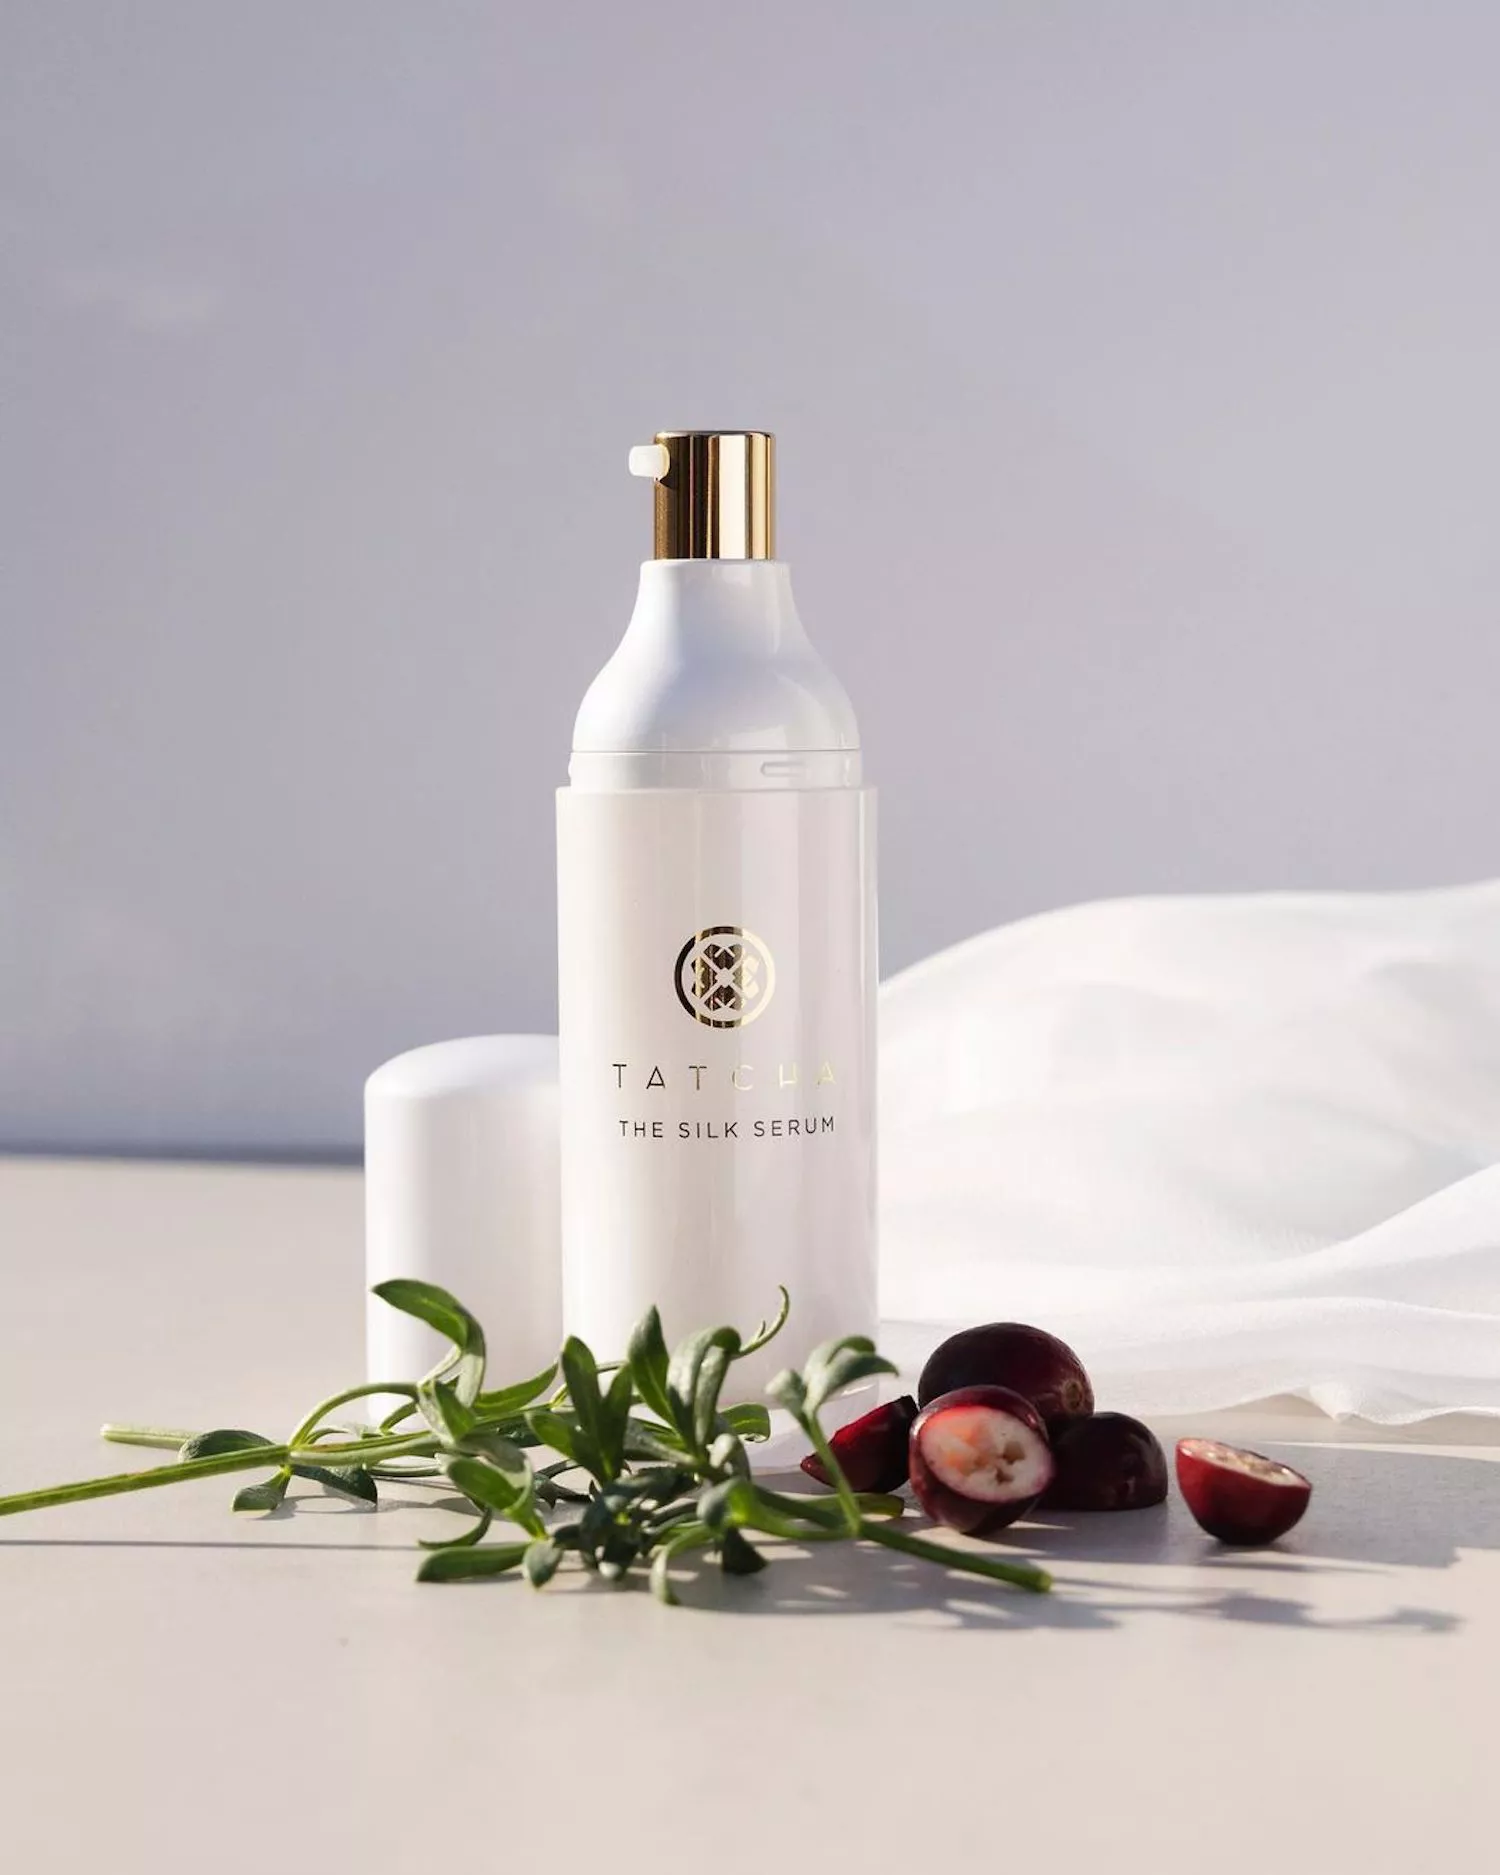 A bottle of Tatcha the Silk Serum, surrounded by cranberries